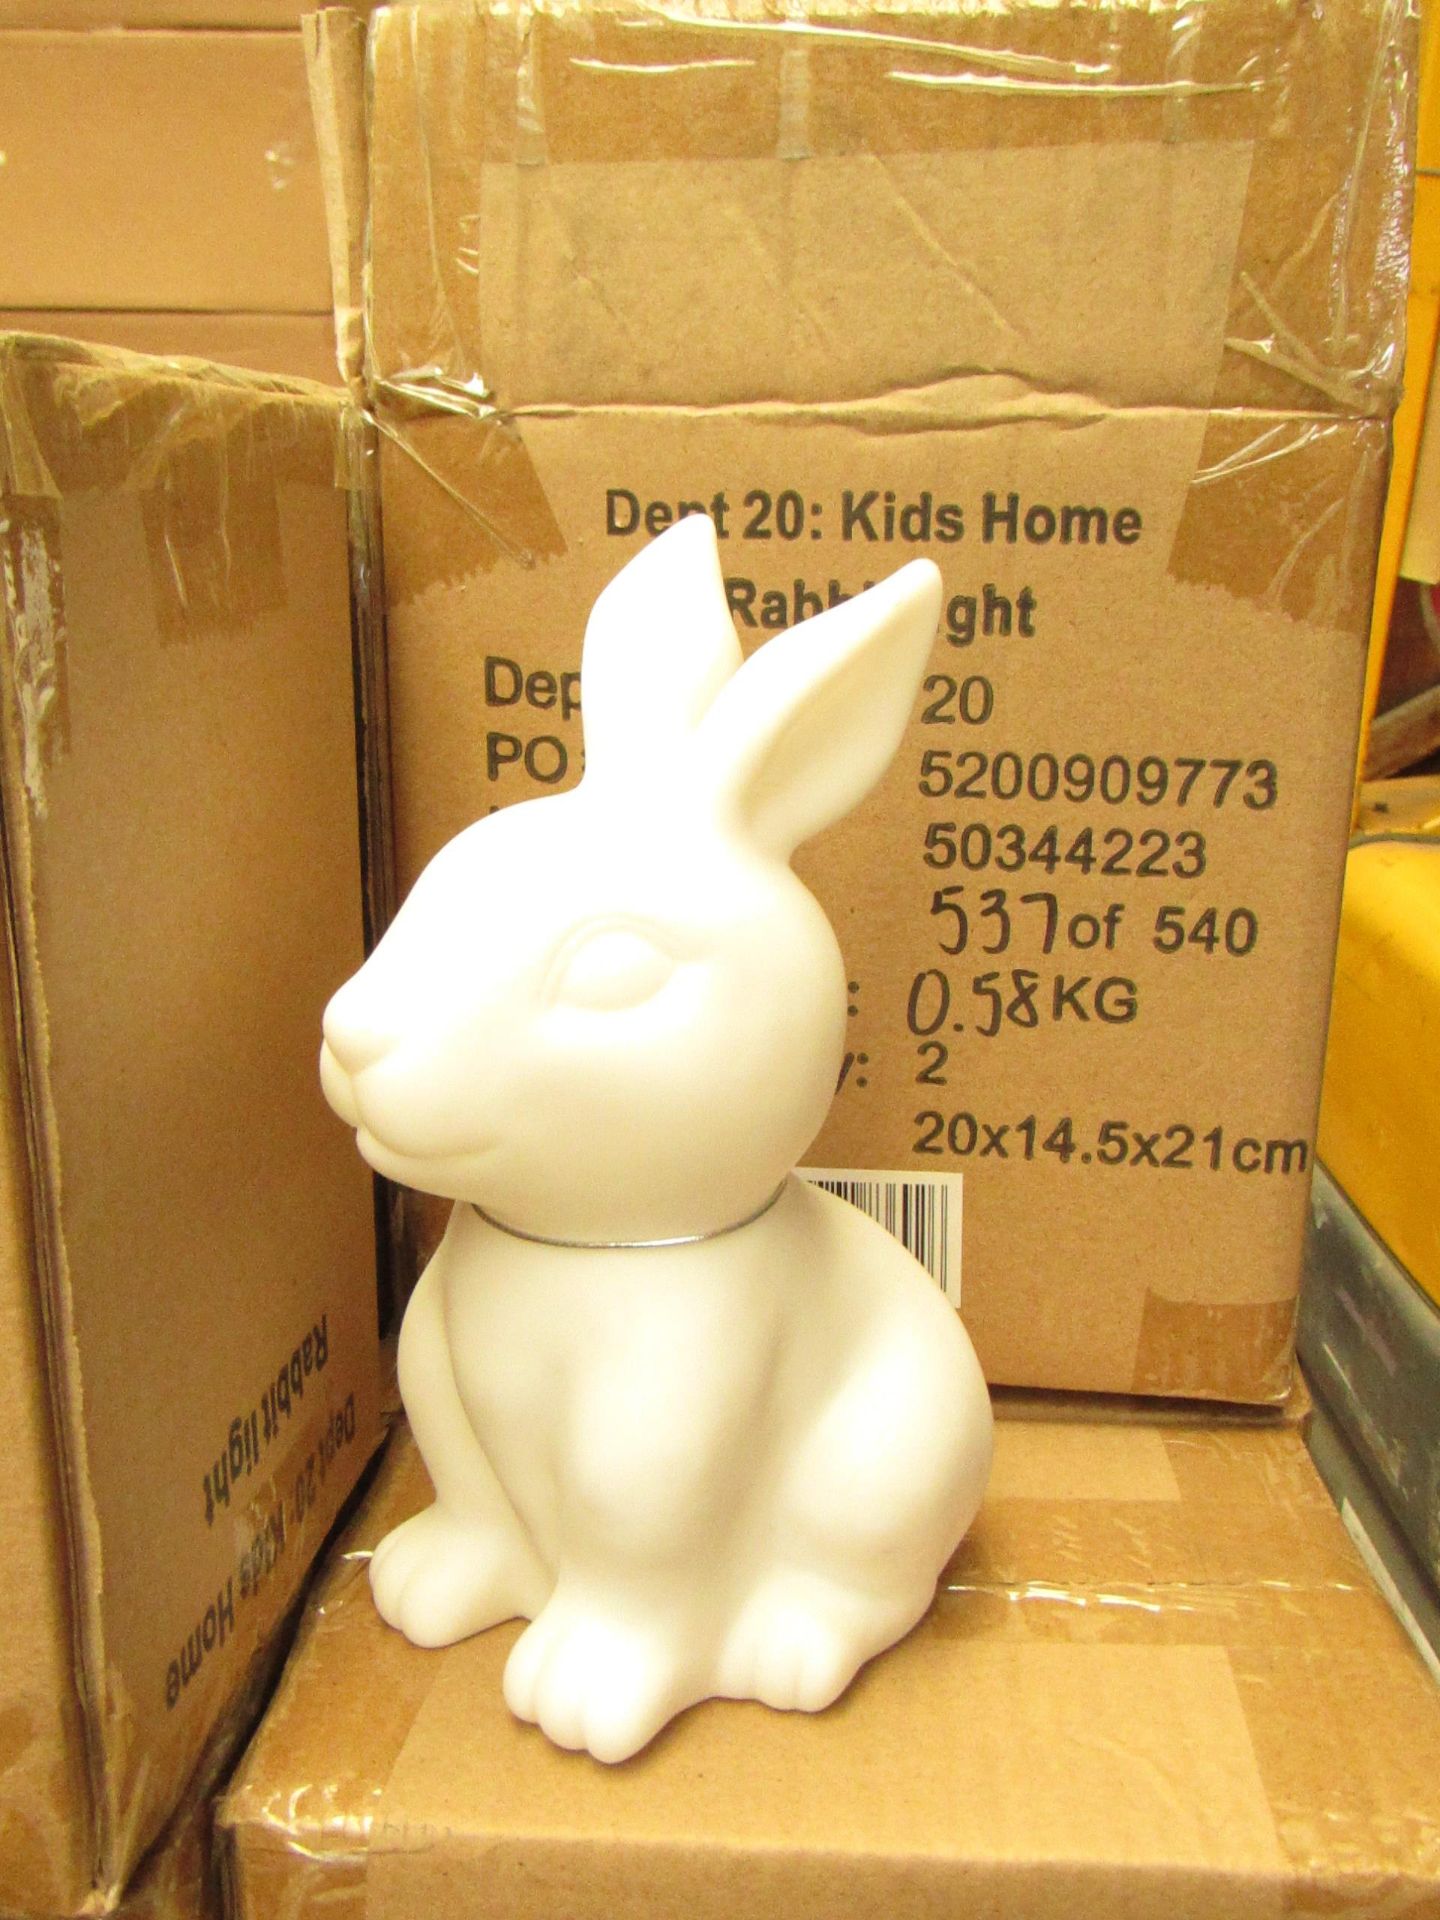 Set of 2x kids home rabbit light, new and boxed.